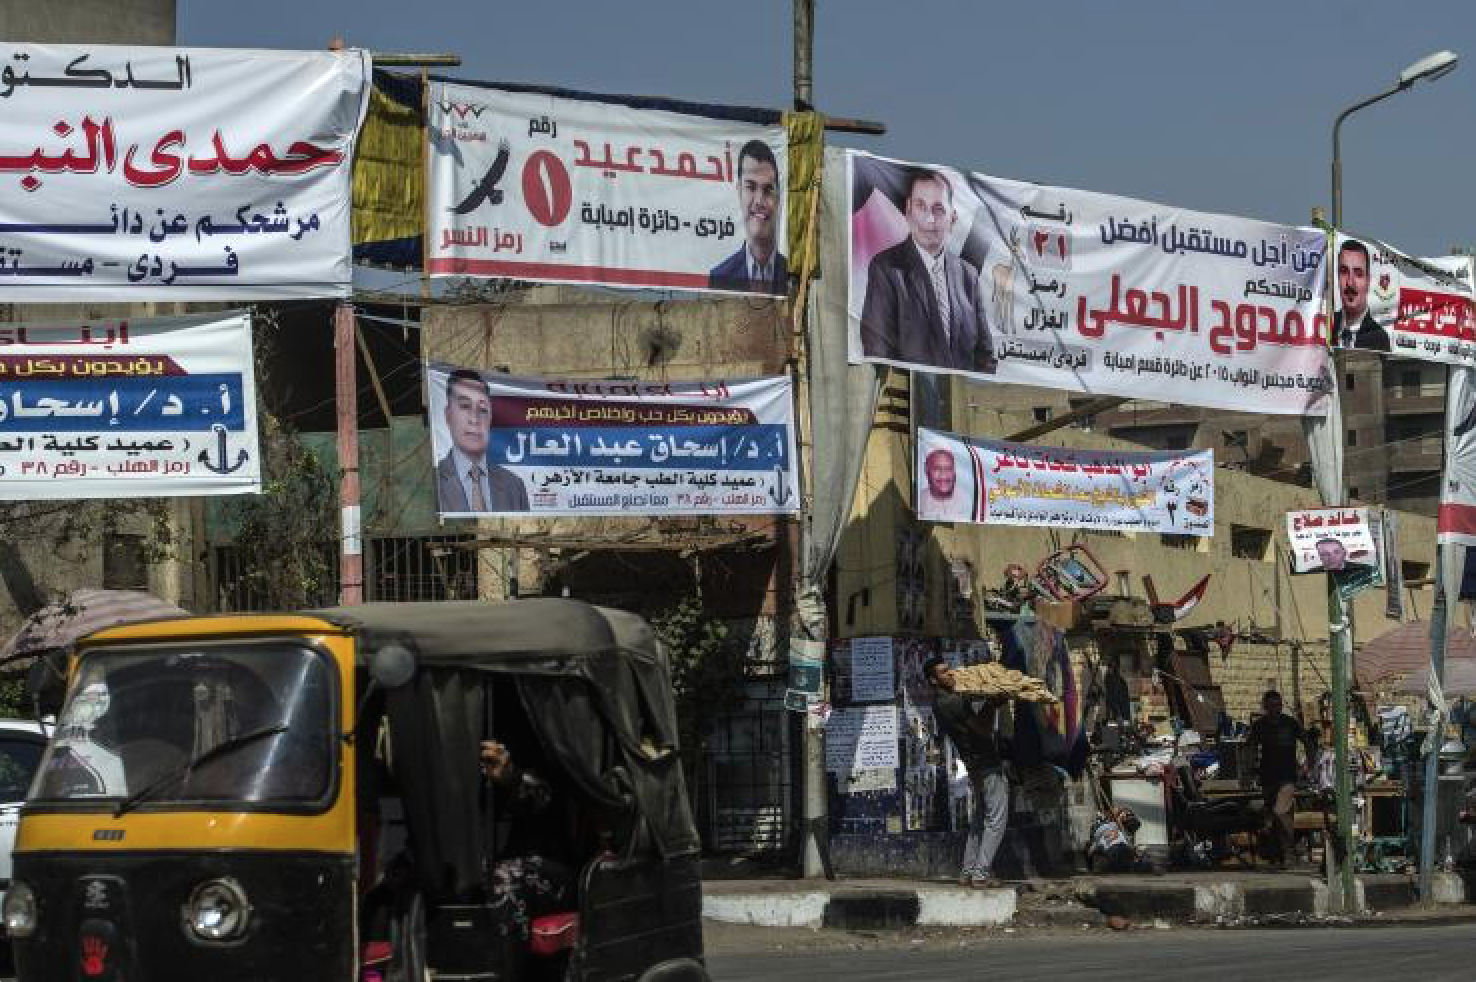 Portraits of candidates for Egypt's long awaited parliamentary elections hang in the Imbaba district of Cairo, on Oct. 15, 2015. Getty Images/AFP/KHALED DESOUKI